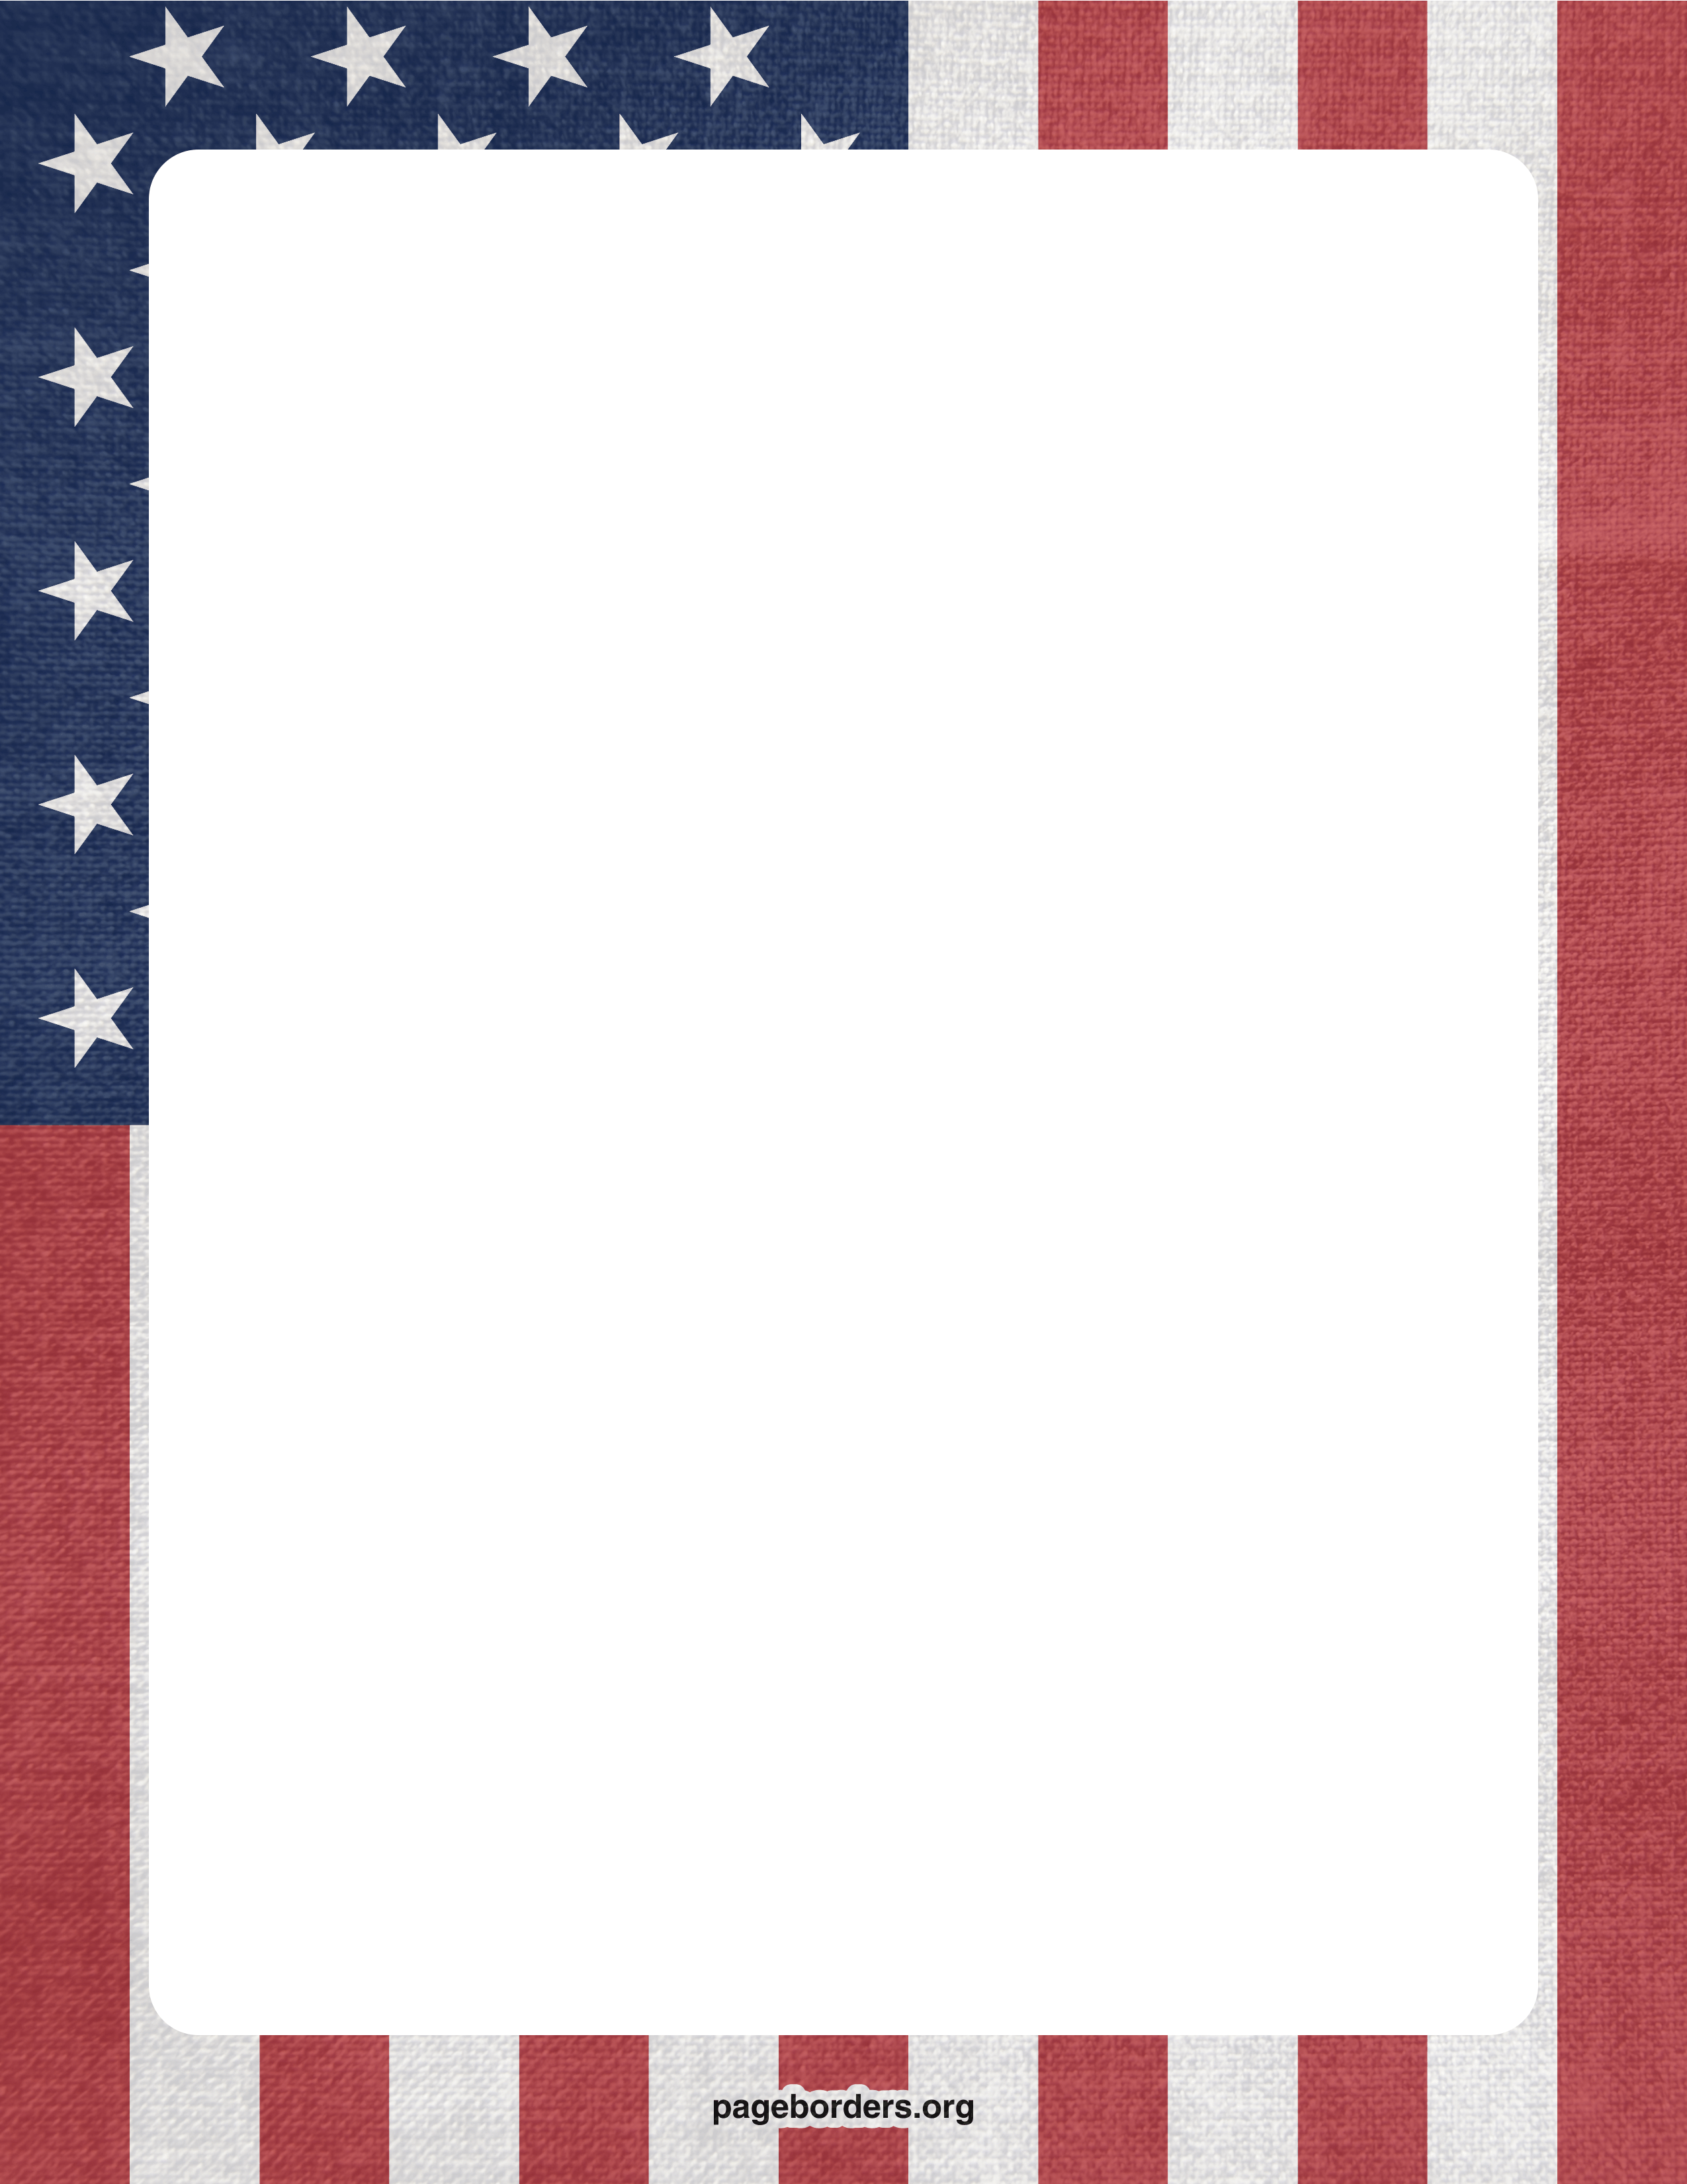 American flag free us flag vector art clipart clipartcow 2